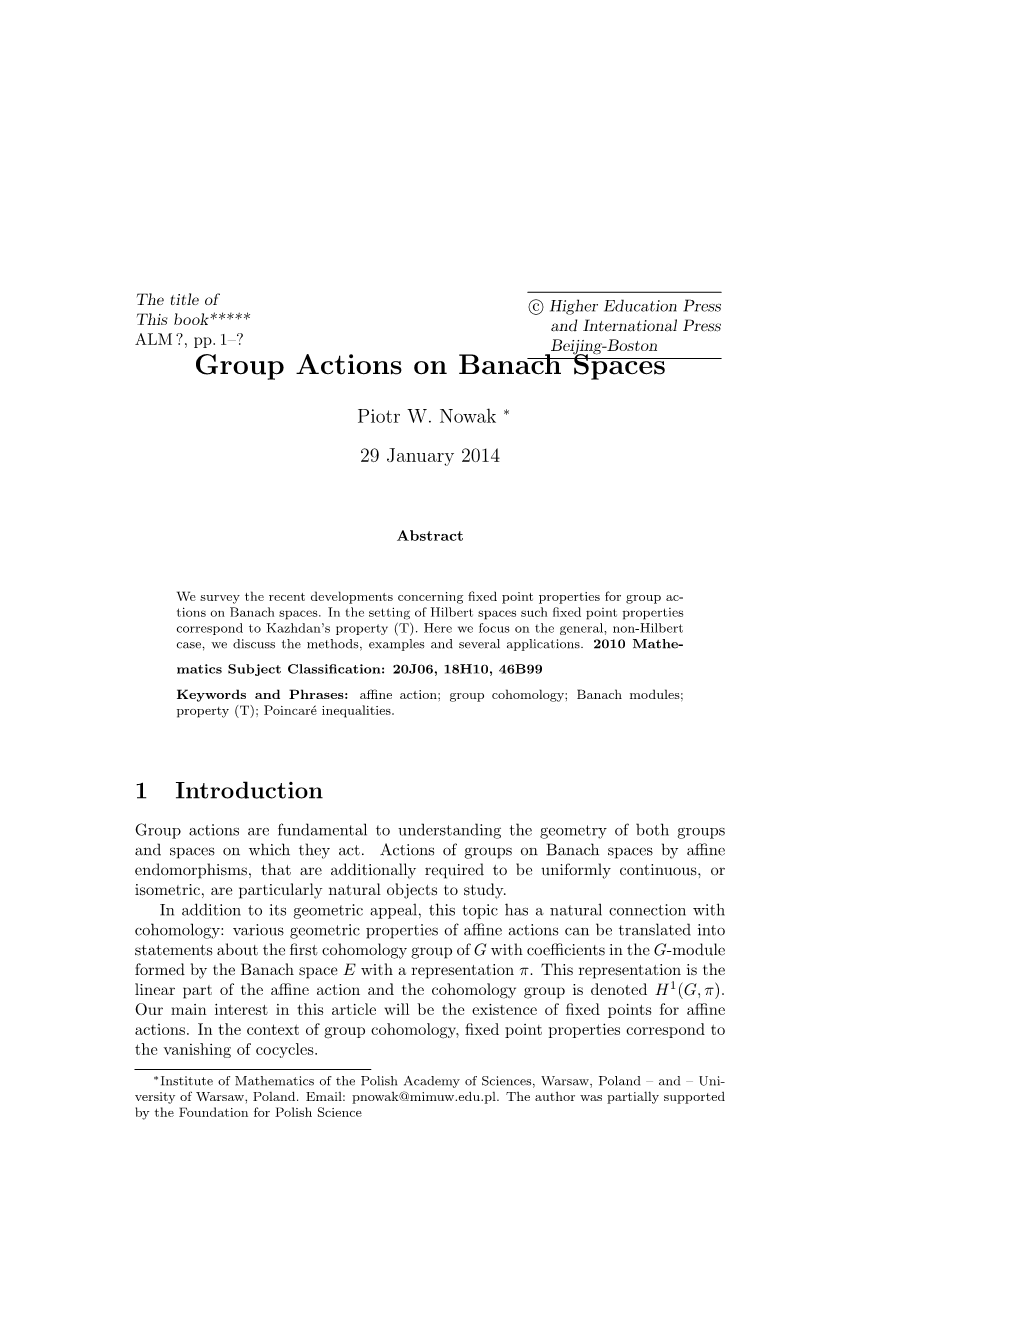 Group Actions on Banach Spaces